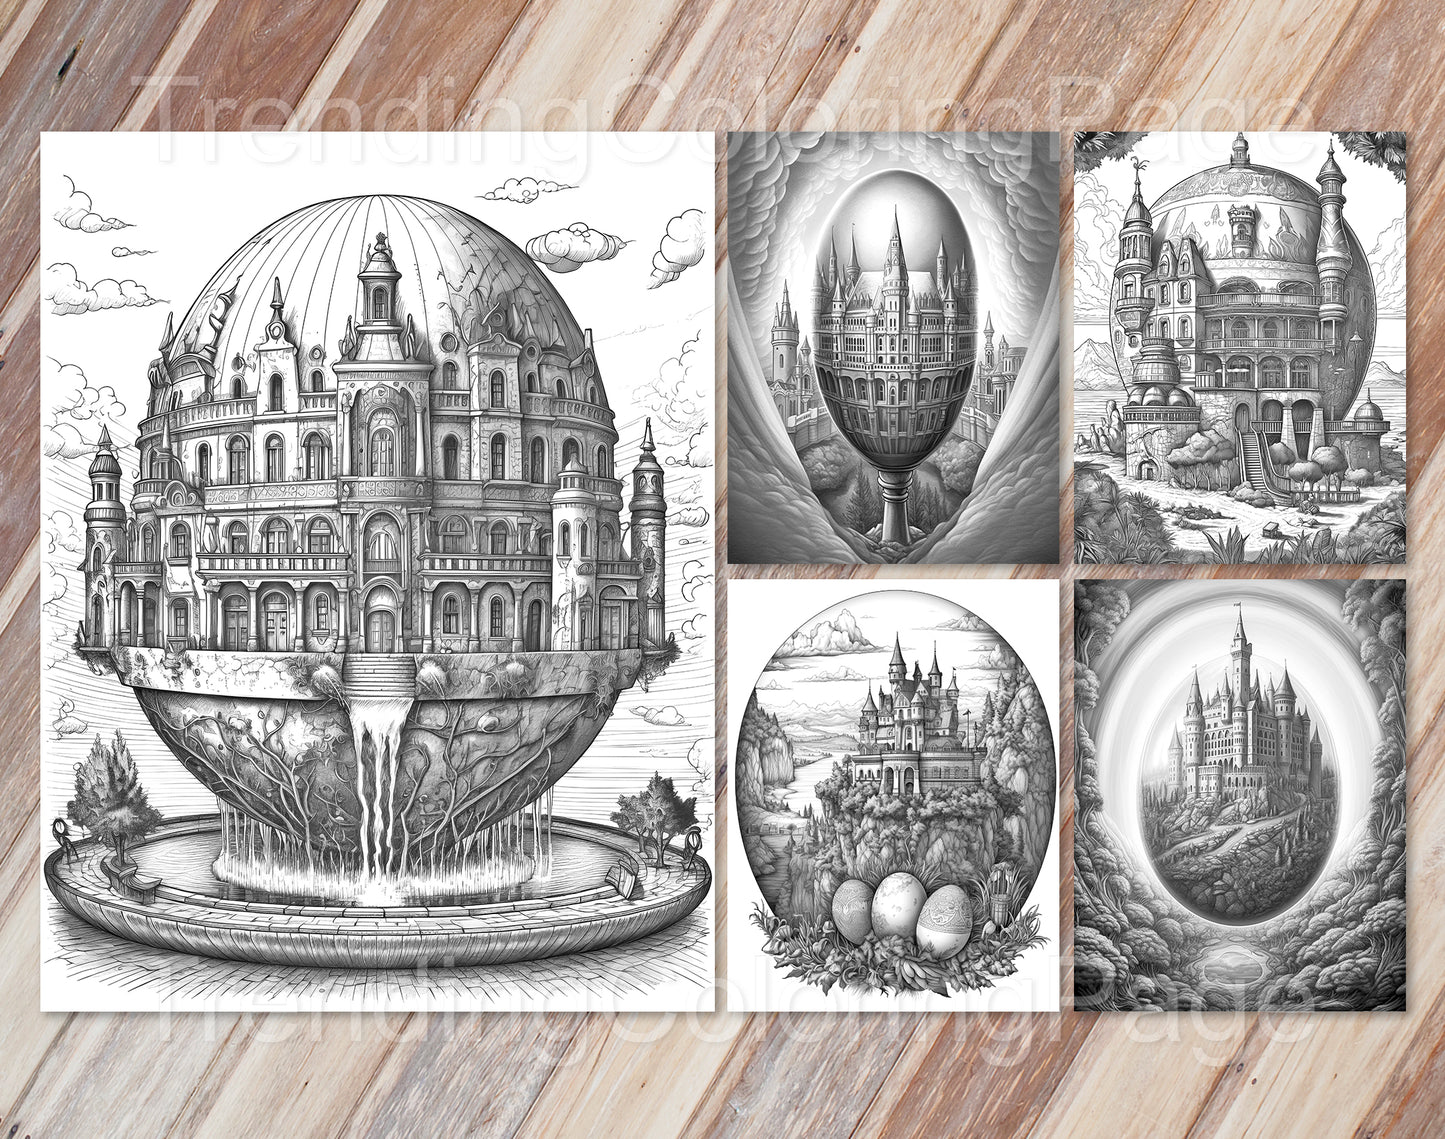 35 Easter Egg Dreamland Grayscale Coloring Pages - Instant Download - Printable Dark/Light